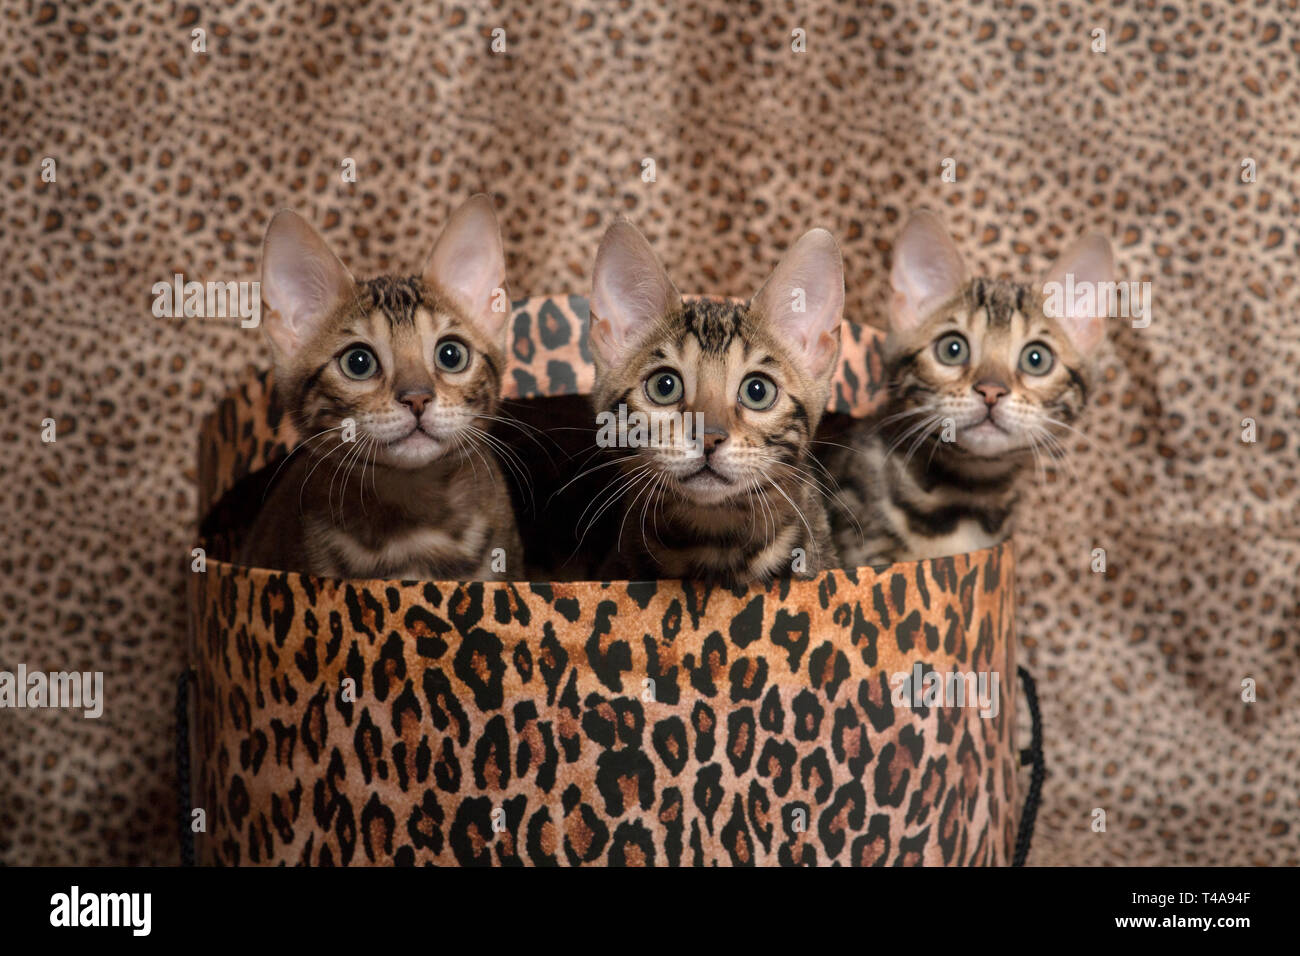 Three purebred bengal kittens inside a leopard print hatbox against a leopard print backdrop Stock Photo